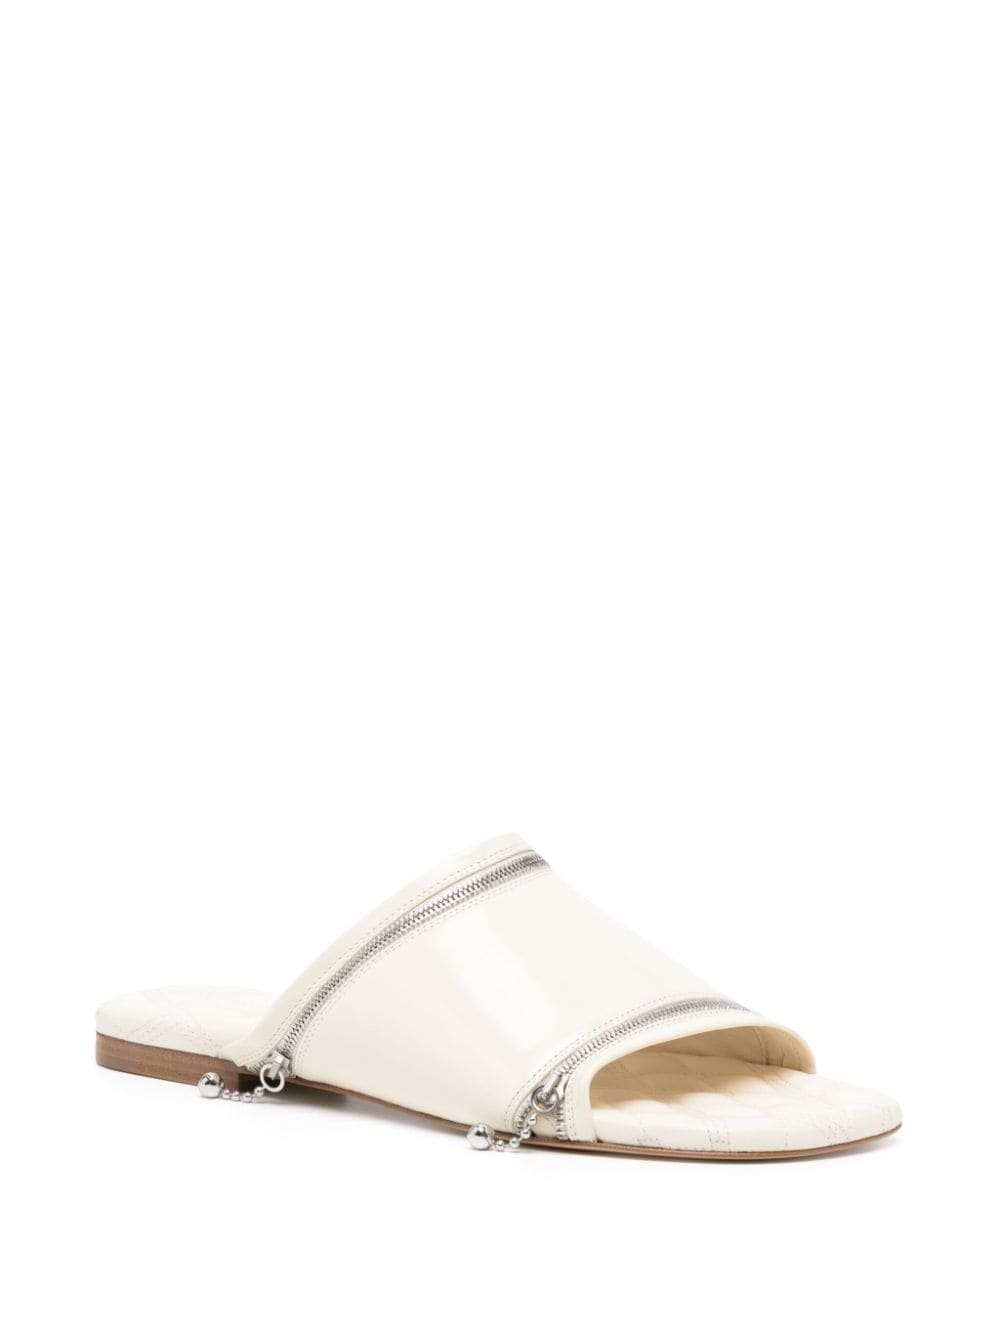 Burberry calf-leather slippers - Beige